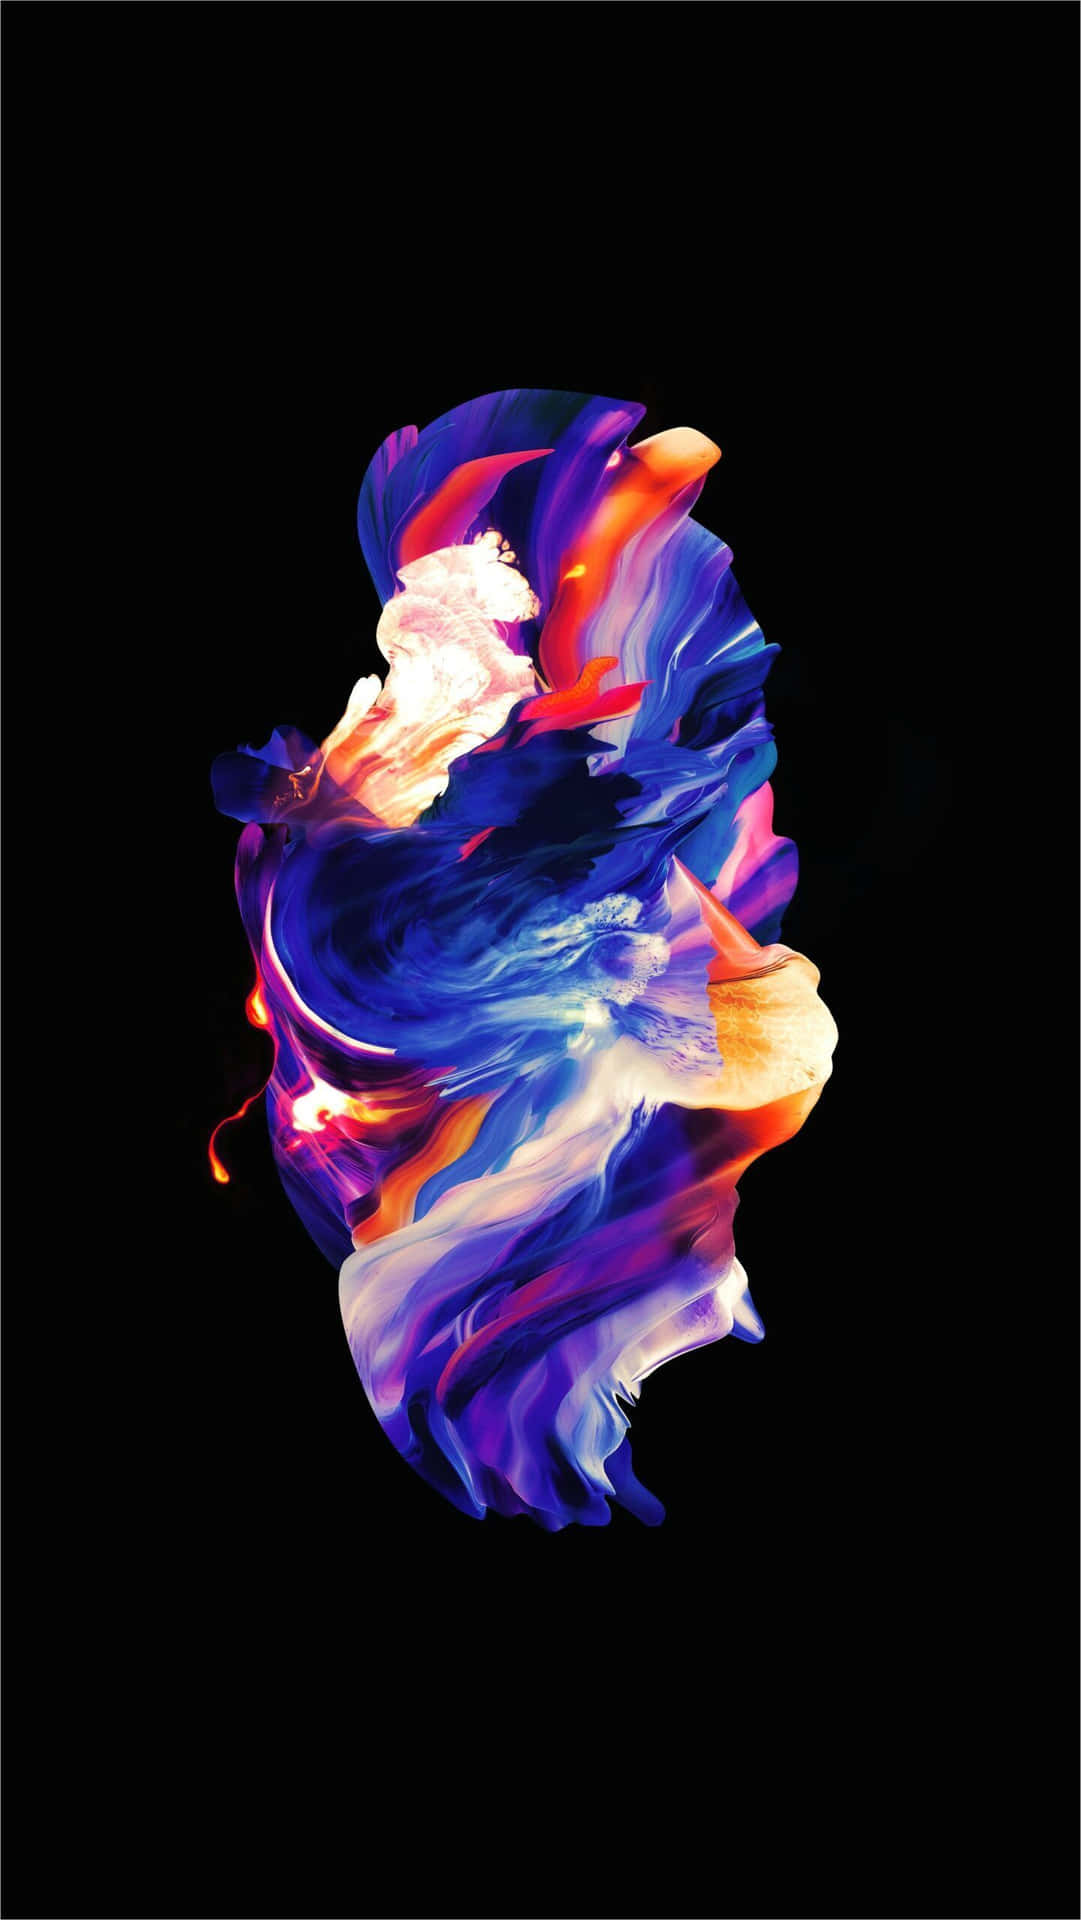 Experience a vivid display with Vibrant Super AMOLED Wallpaper